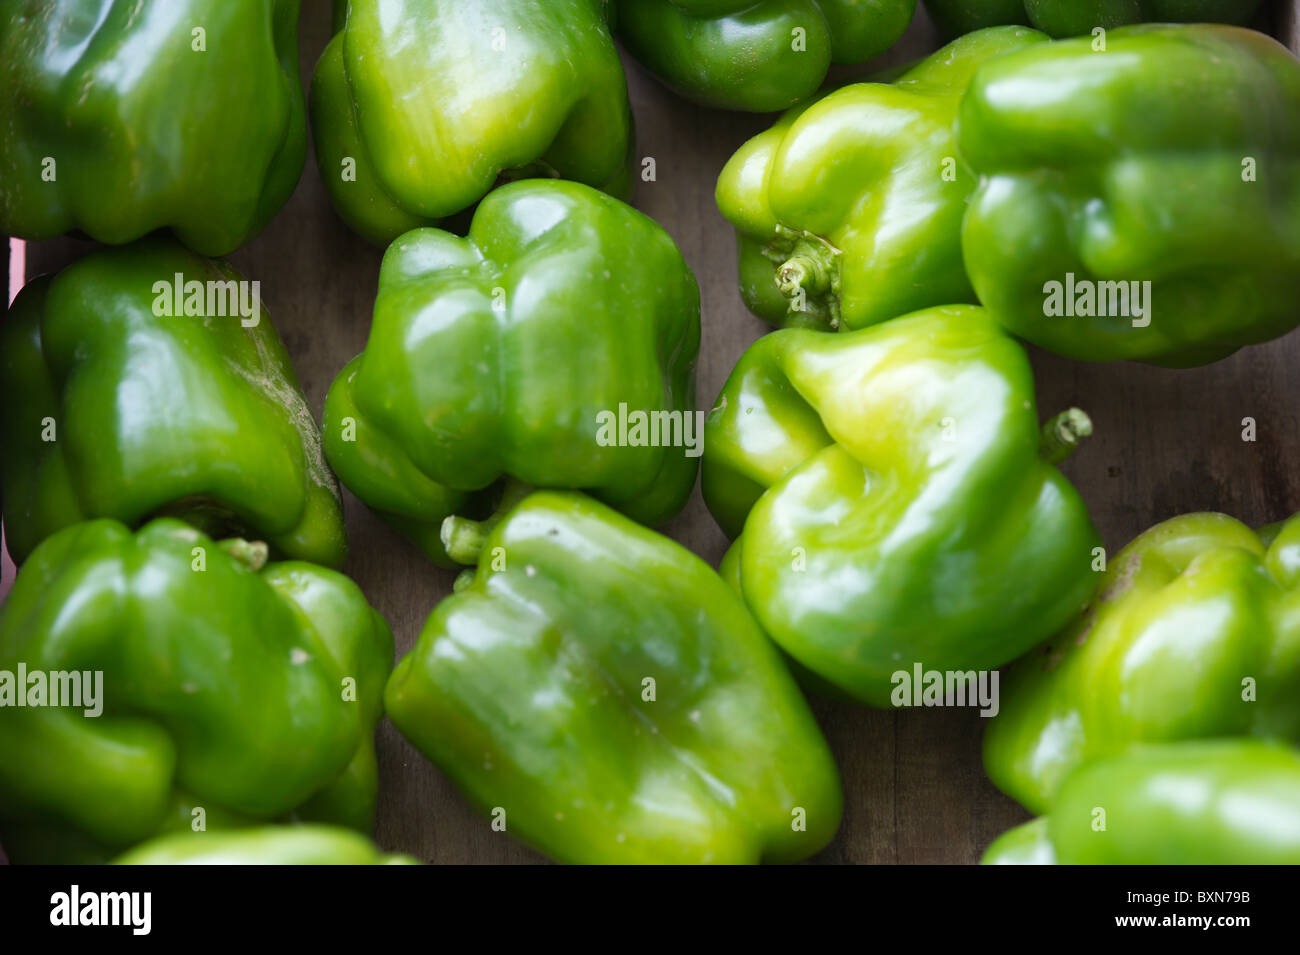 Green peppers Stock Photo